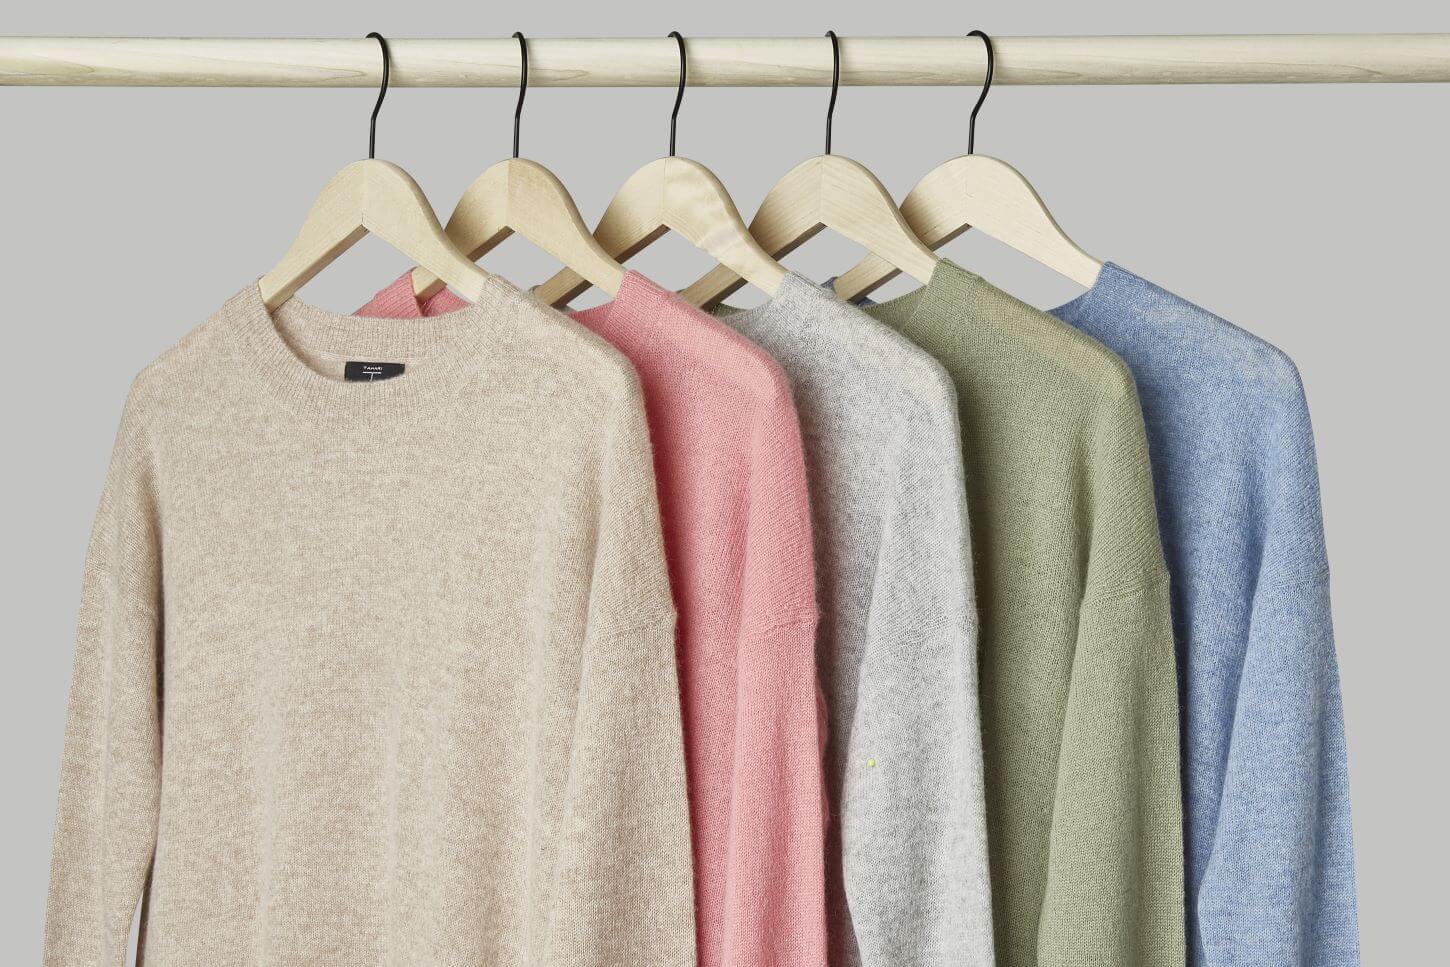 Cashmere sweaters on hangers on a rack